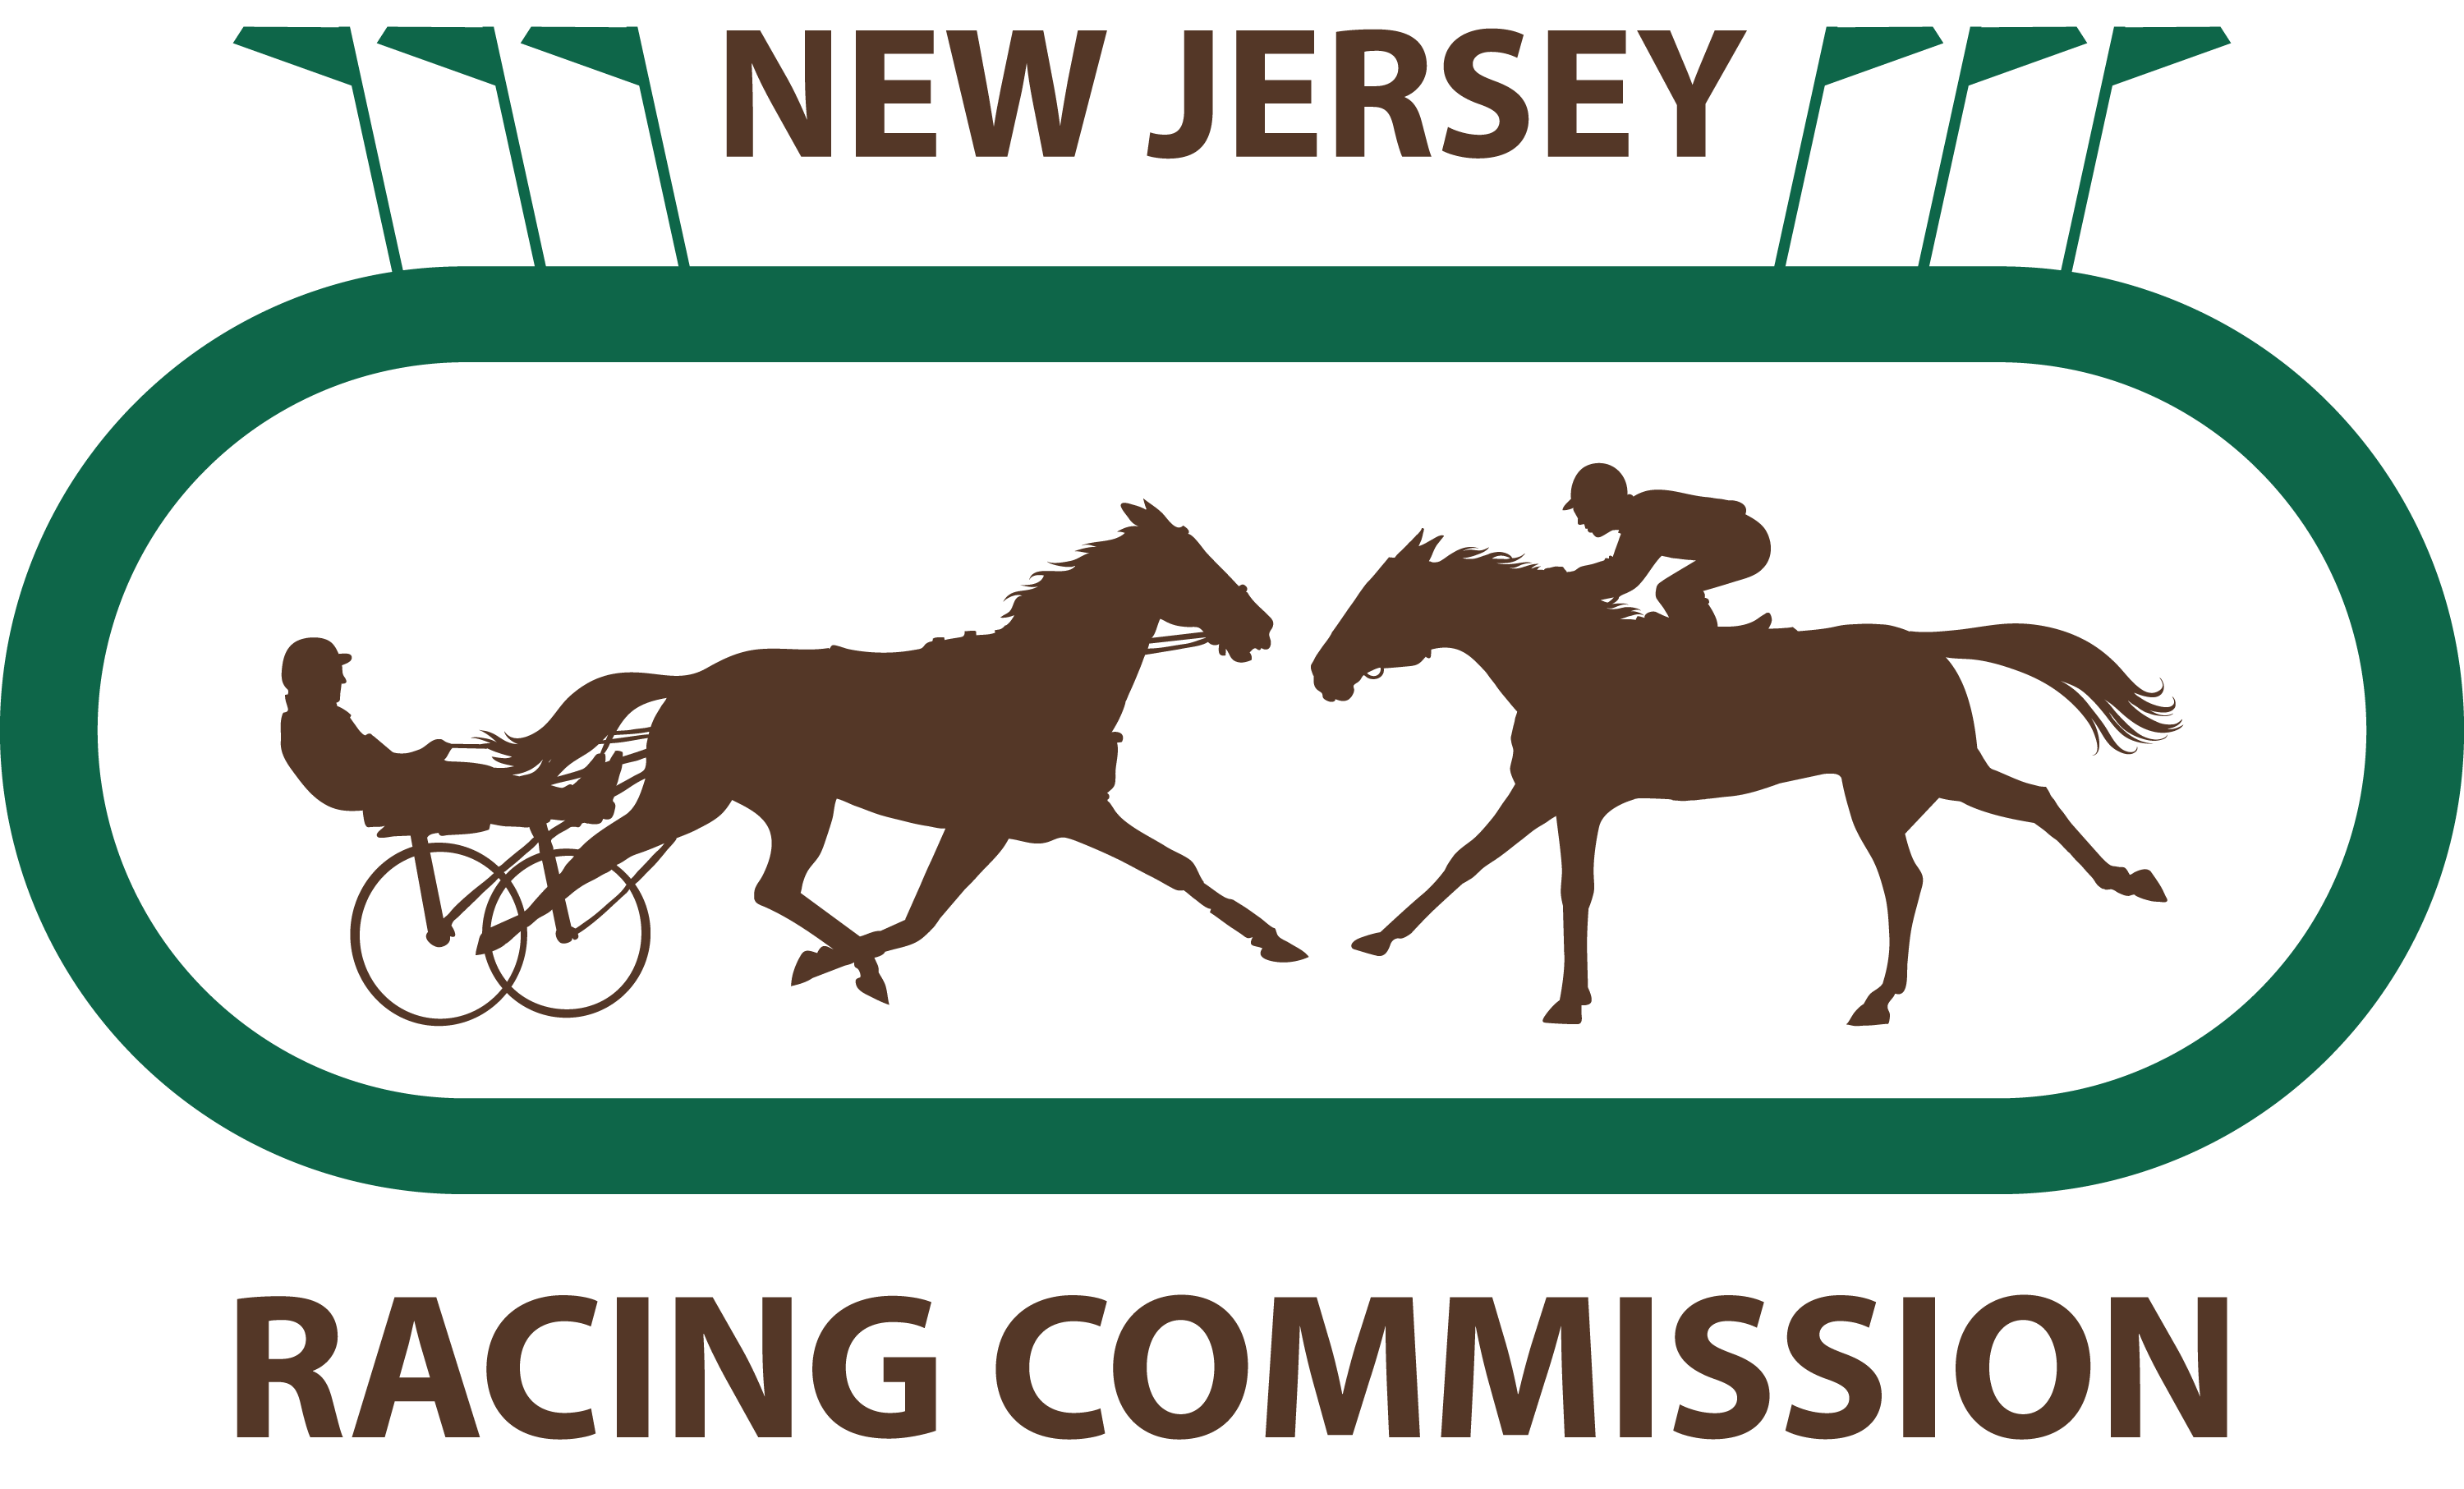 New Jersey Racing Commission